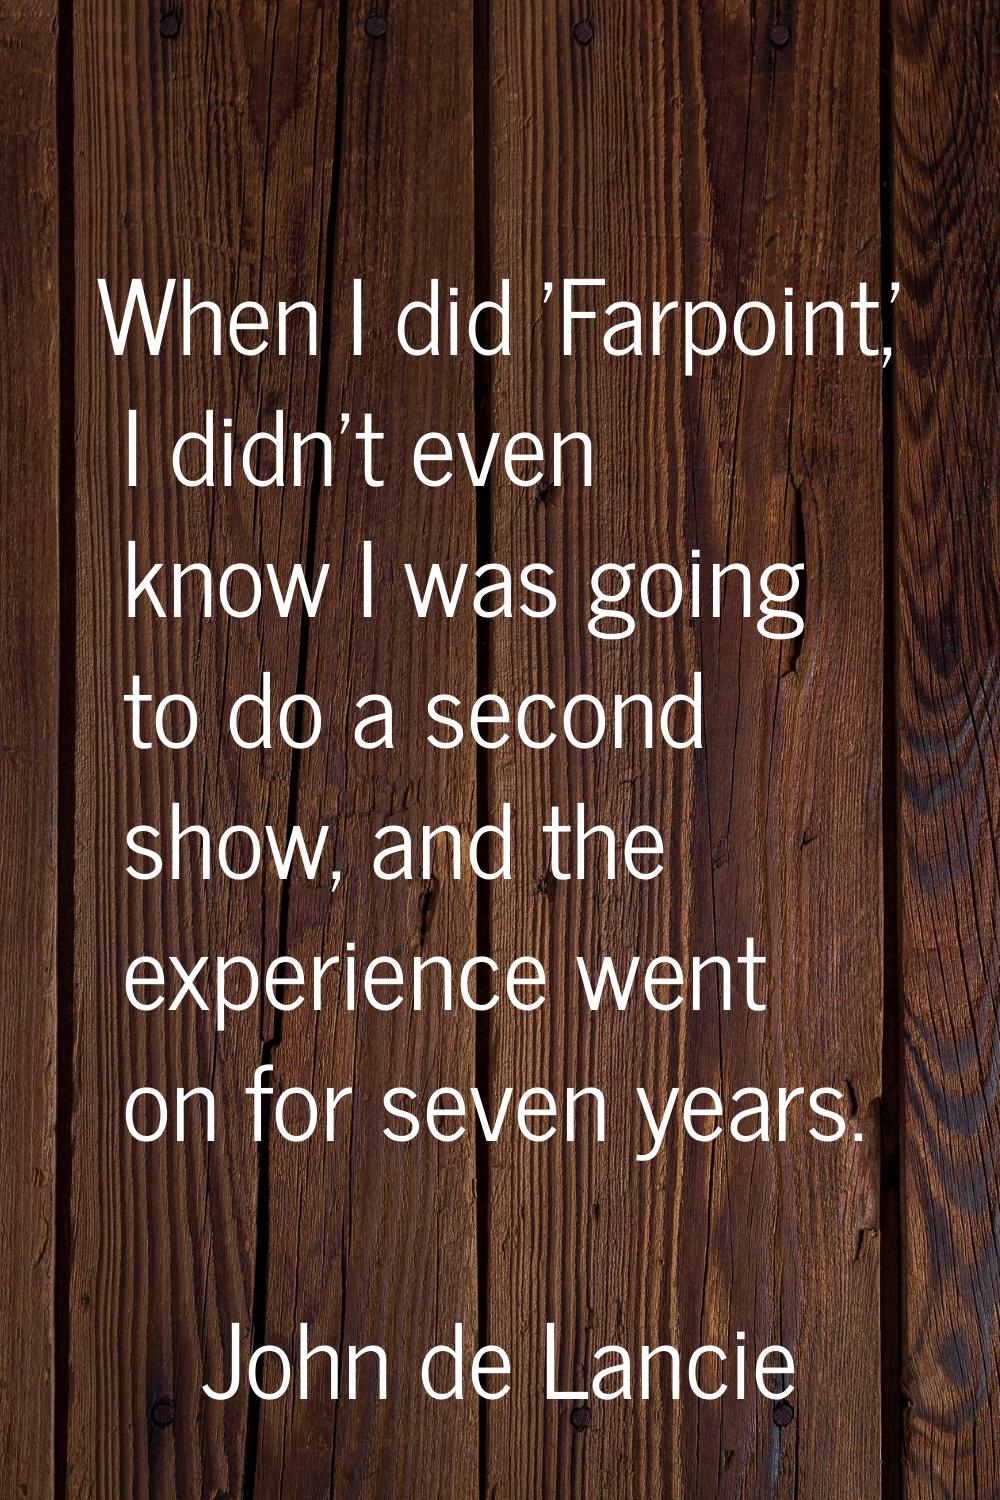 When I did 'Farpoint,' I didn't even know I was going to do a second show, and the experience went 